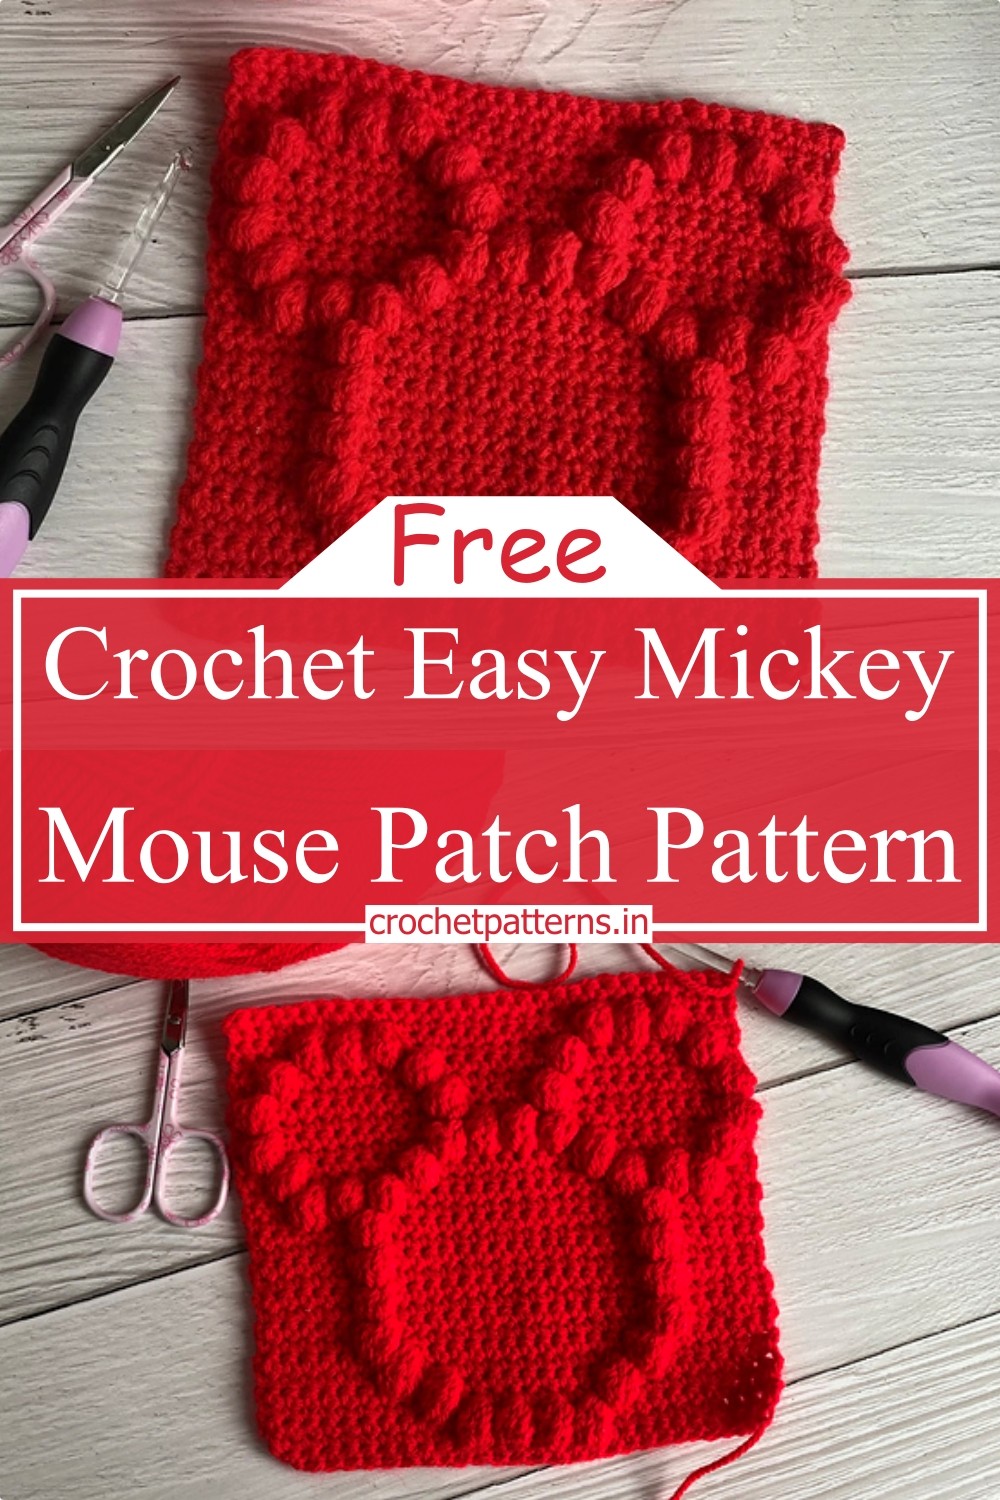 Crochet Easy Mickey Mouse Patch Pattern